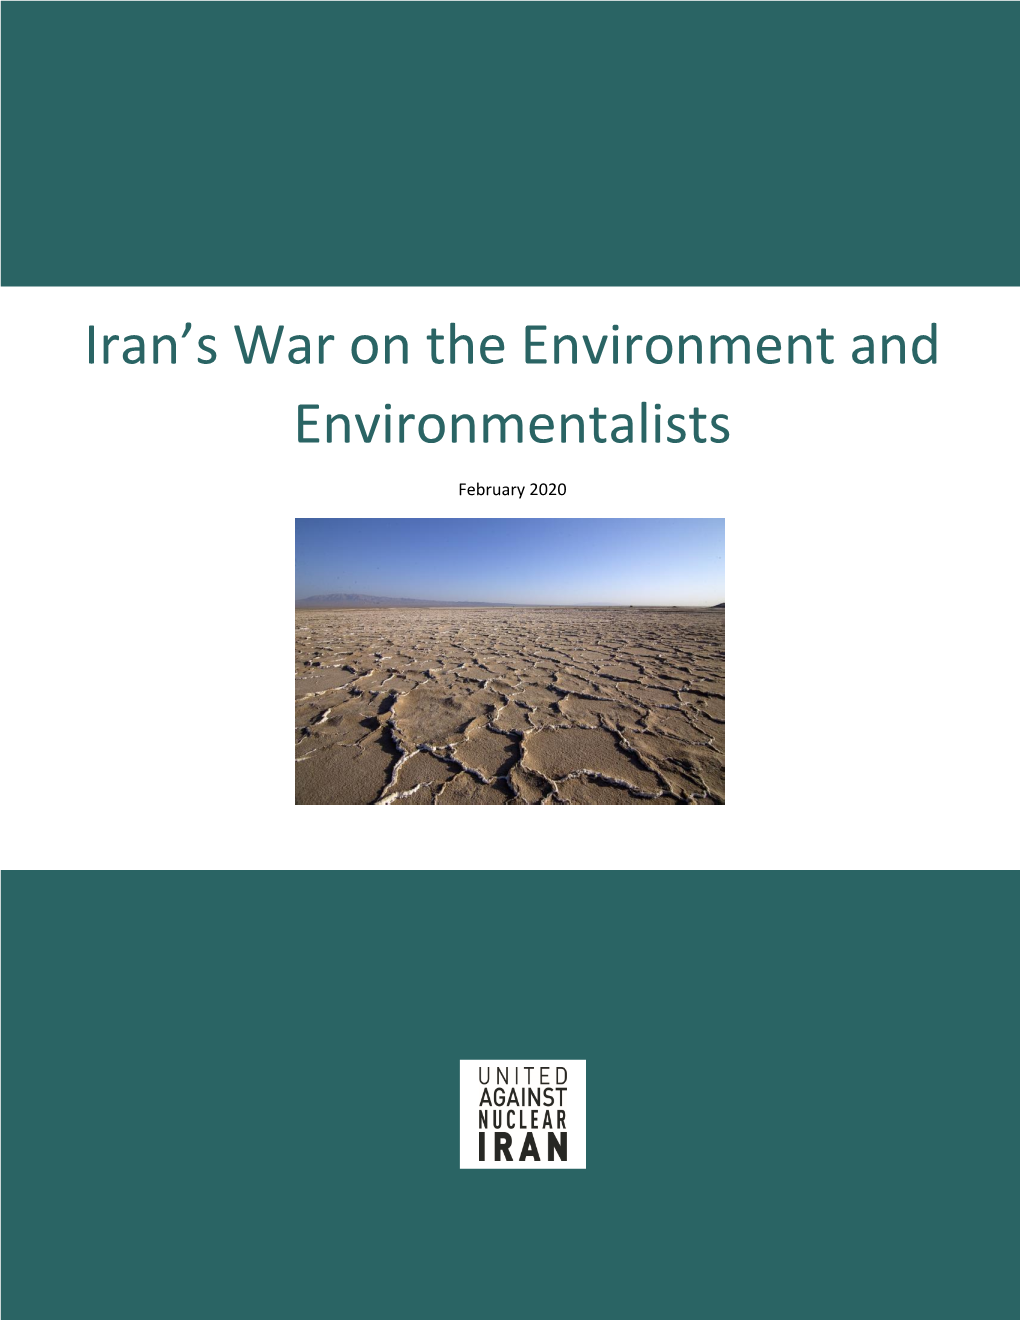 Iran's War on the Environment and Environmentalists